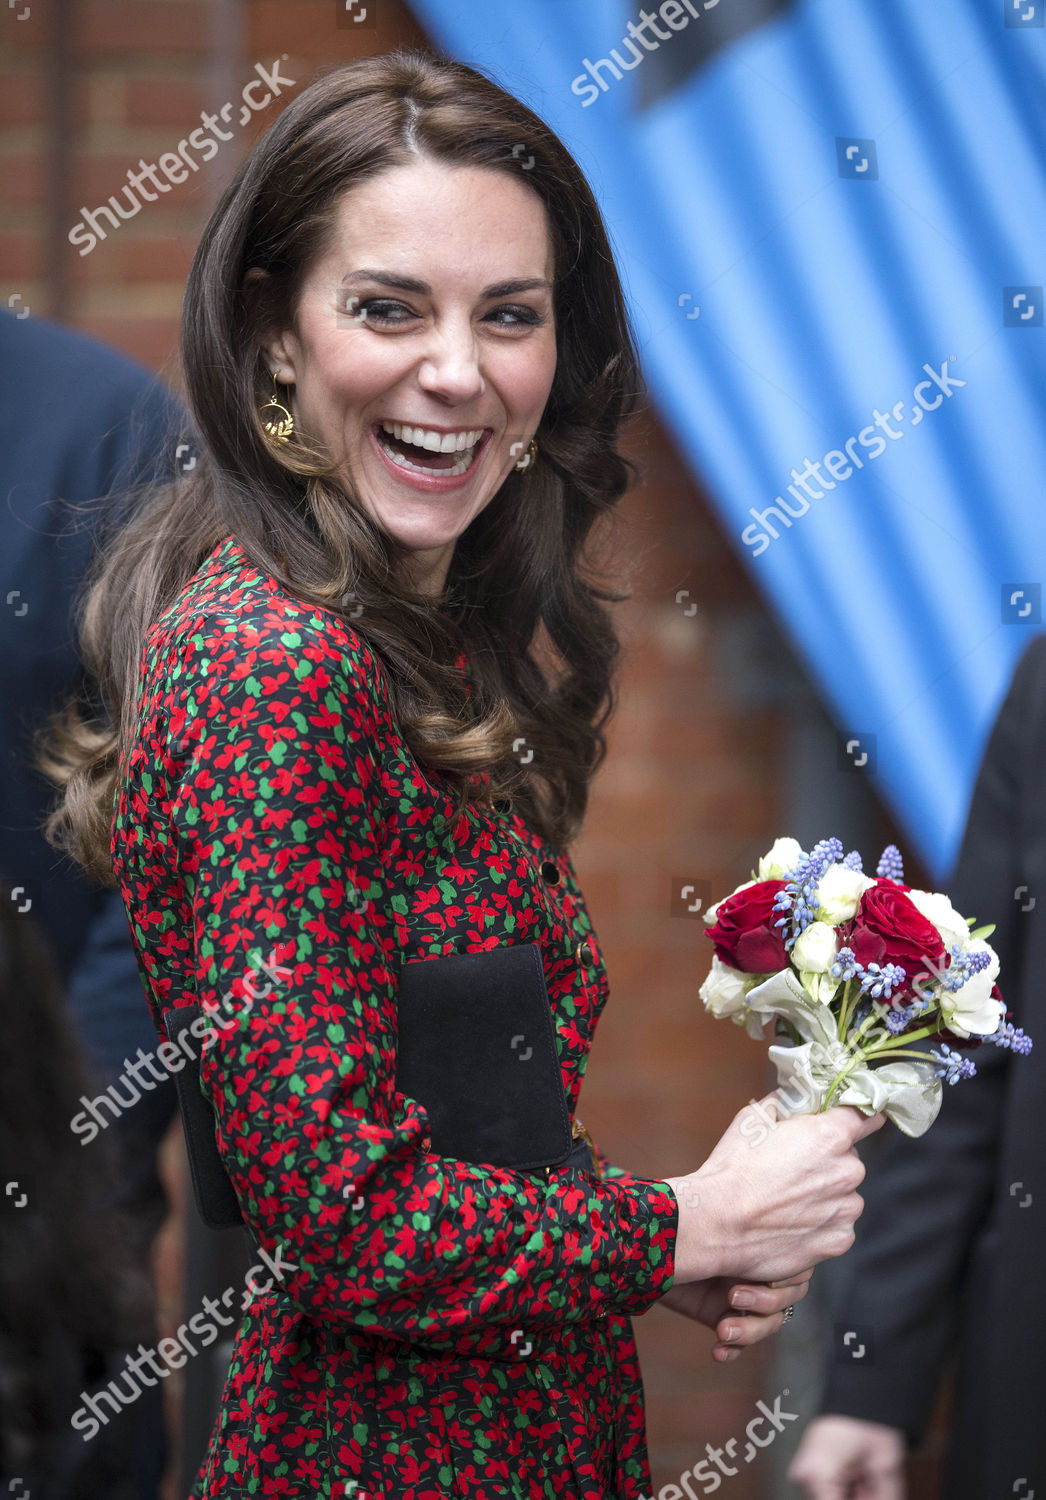 royal-visit-to-youth-support-service-the-mix-london-uk-shutterstock-editorial-7583001i.jpg